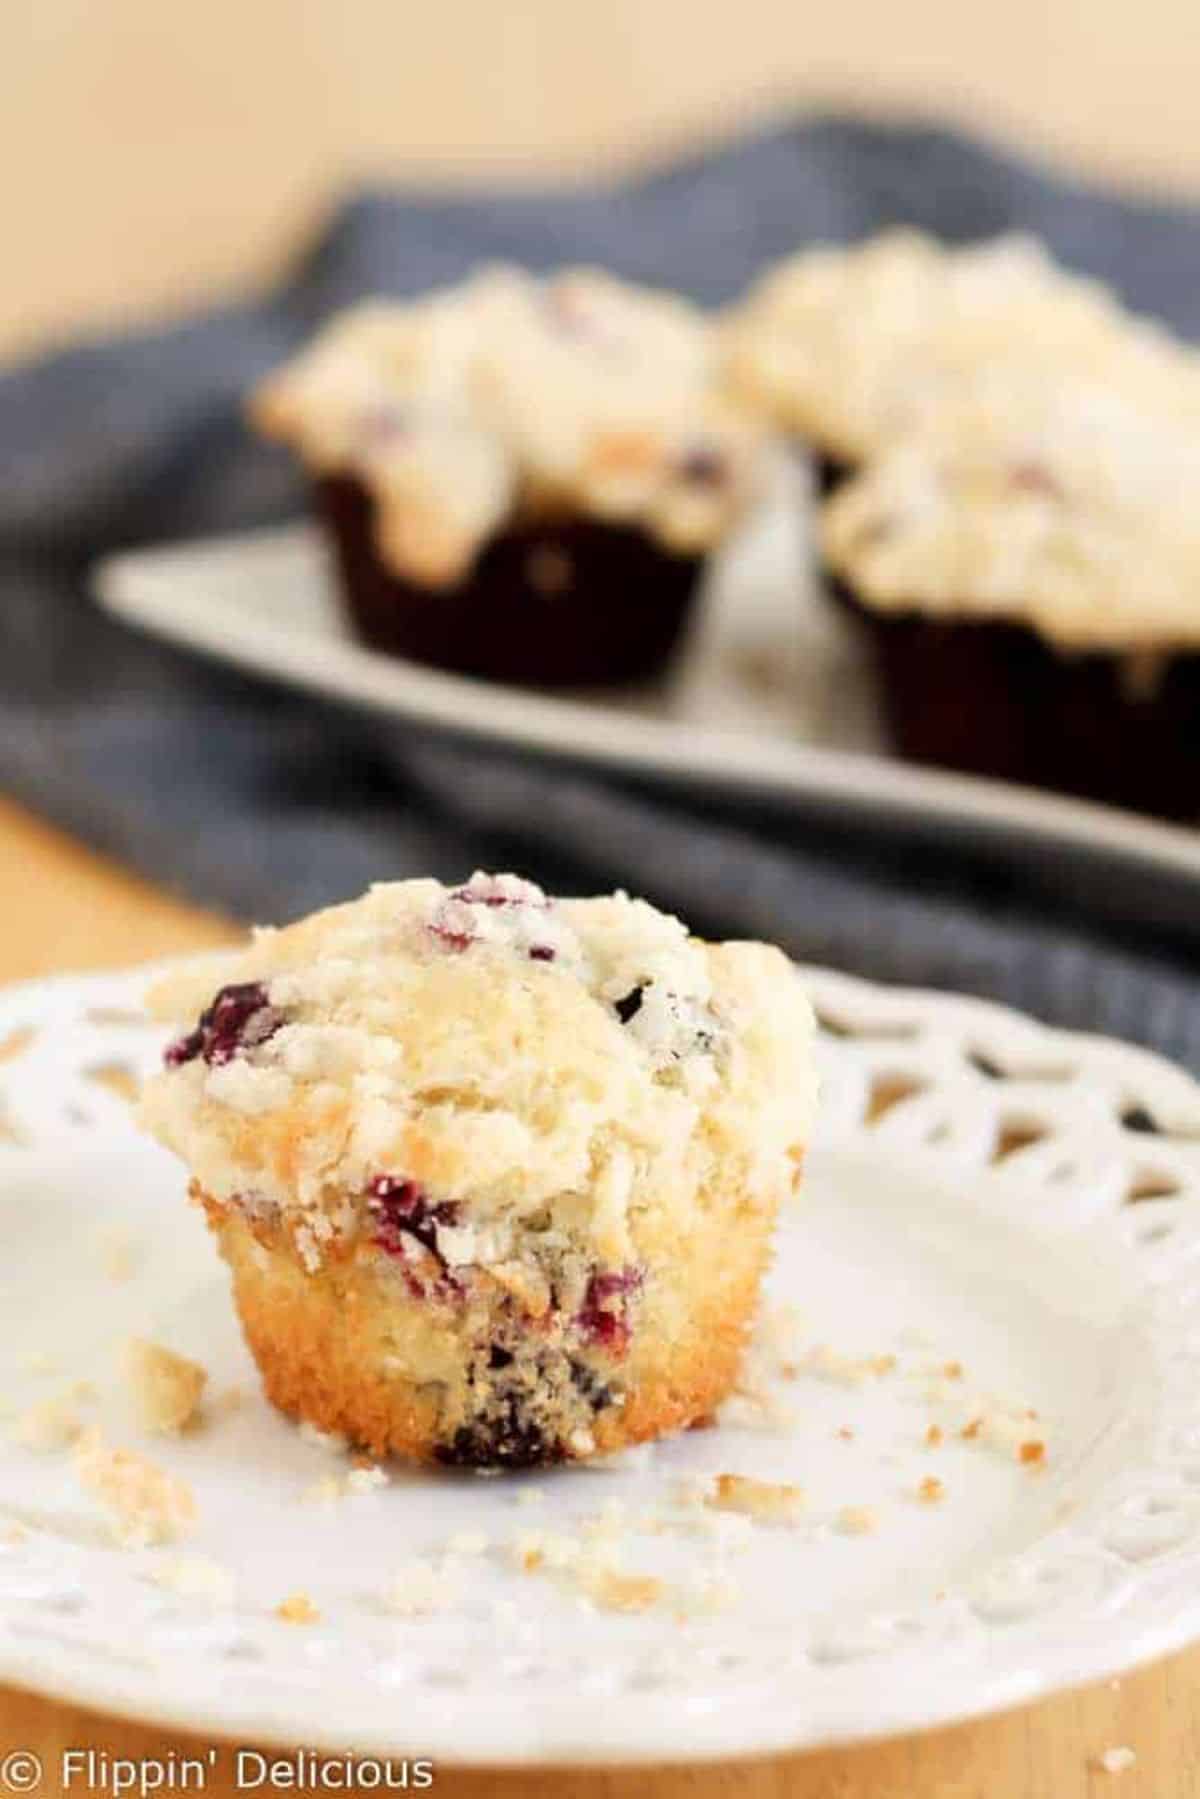 Mouth-watering Gluten-Free Blueberry Muffin With Streusel Crumb Topping on a white plate.